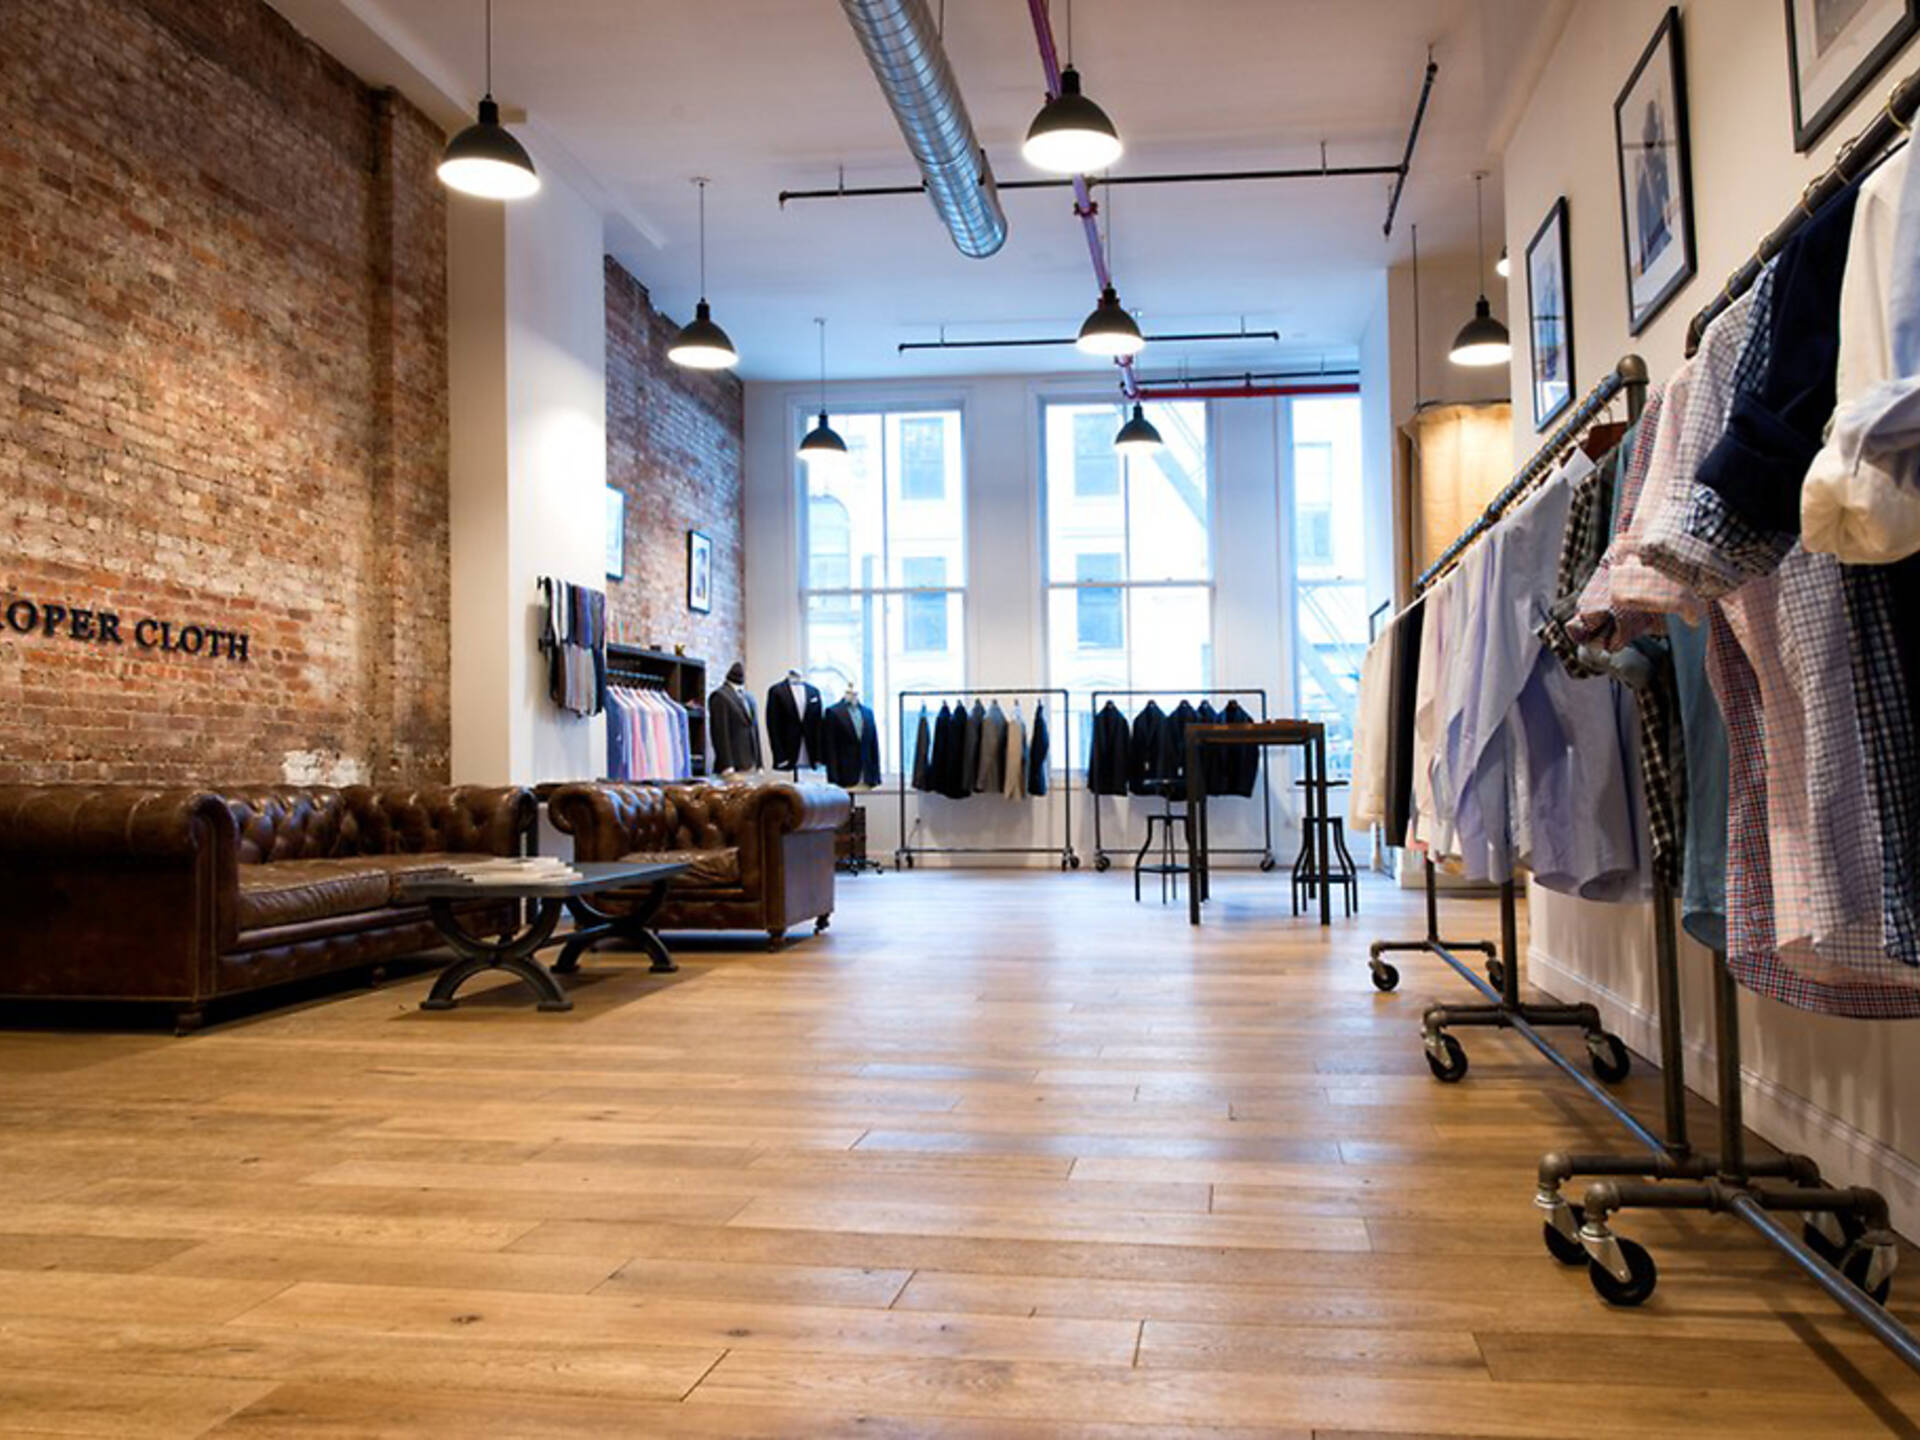 Best big and tall stores in NYC for men's clothing and footwear